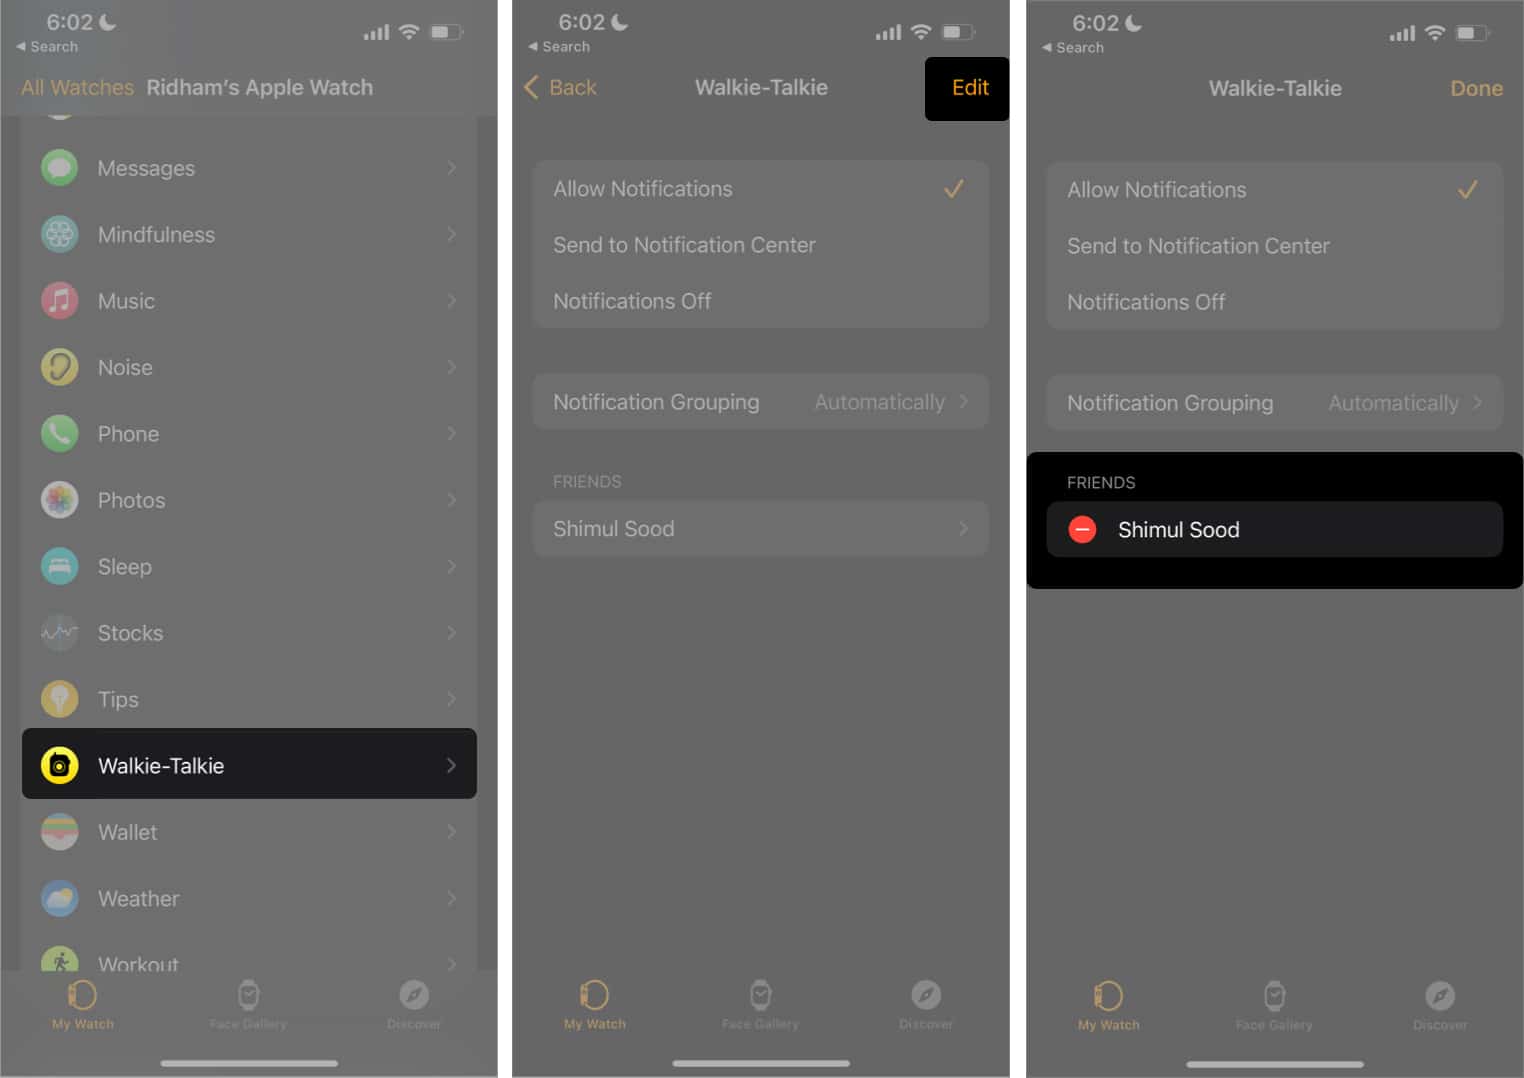 Remove friends from the Walkie-Talkie app on iPhone